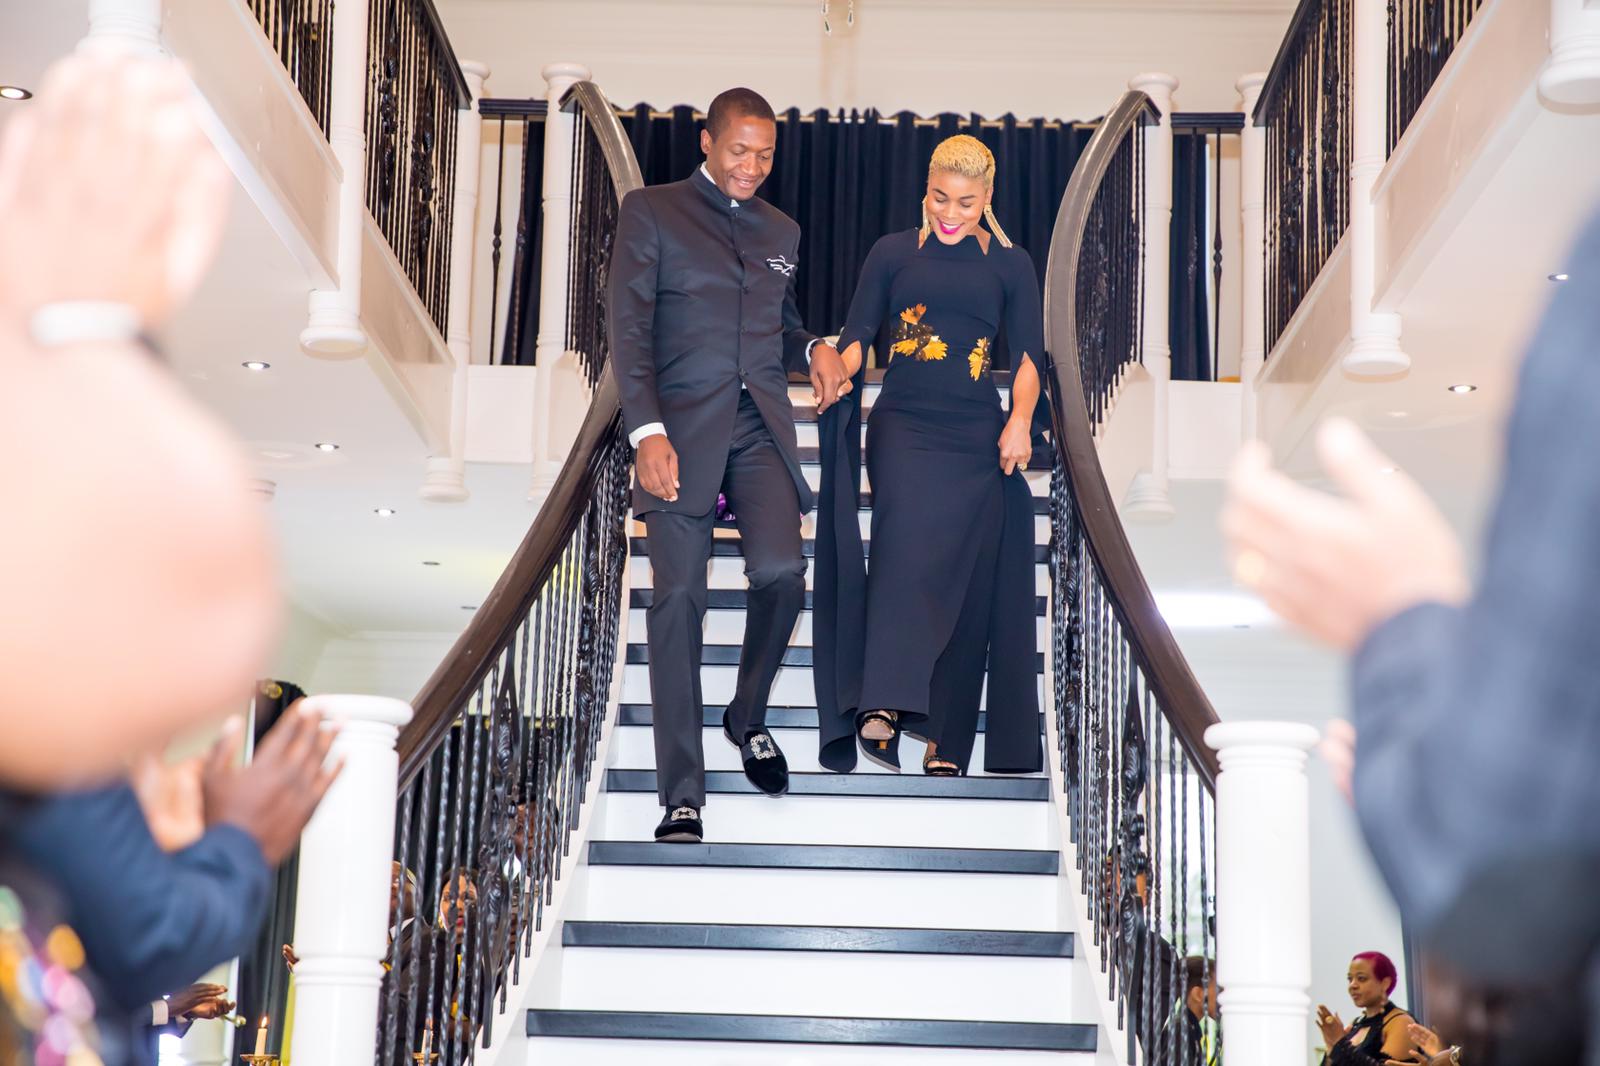 Following the lifting of UK government lockdown regulations allowing for up to 30 people per event, Prophet Uebert Angel put up a spectacular birthday party for his wife of 20 years Beverly Angel at the couple's 14 acre mansion in Lincoln (UK) dubbed "The Angel Manor".